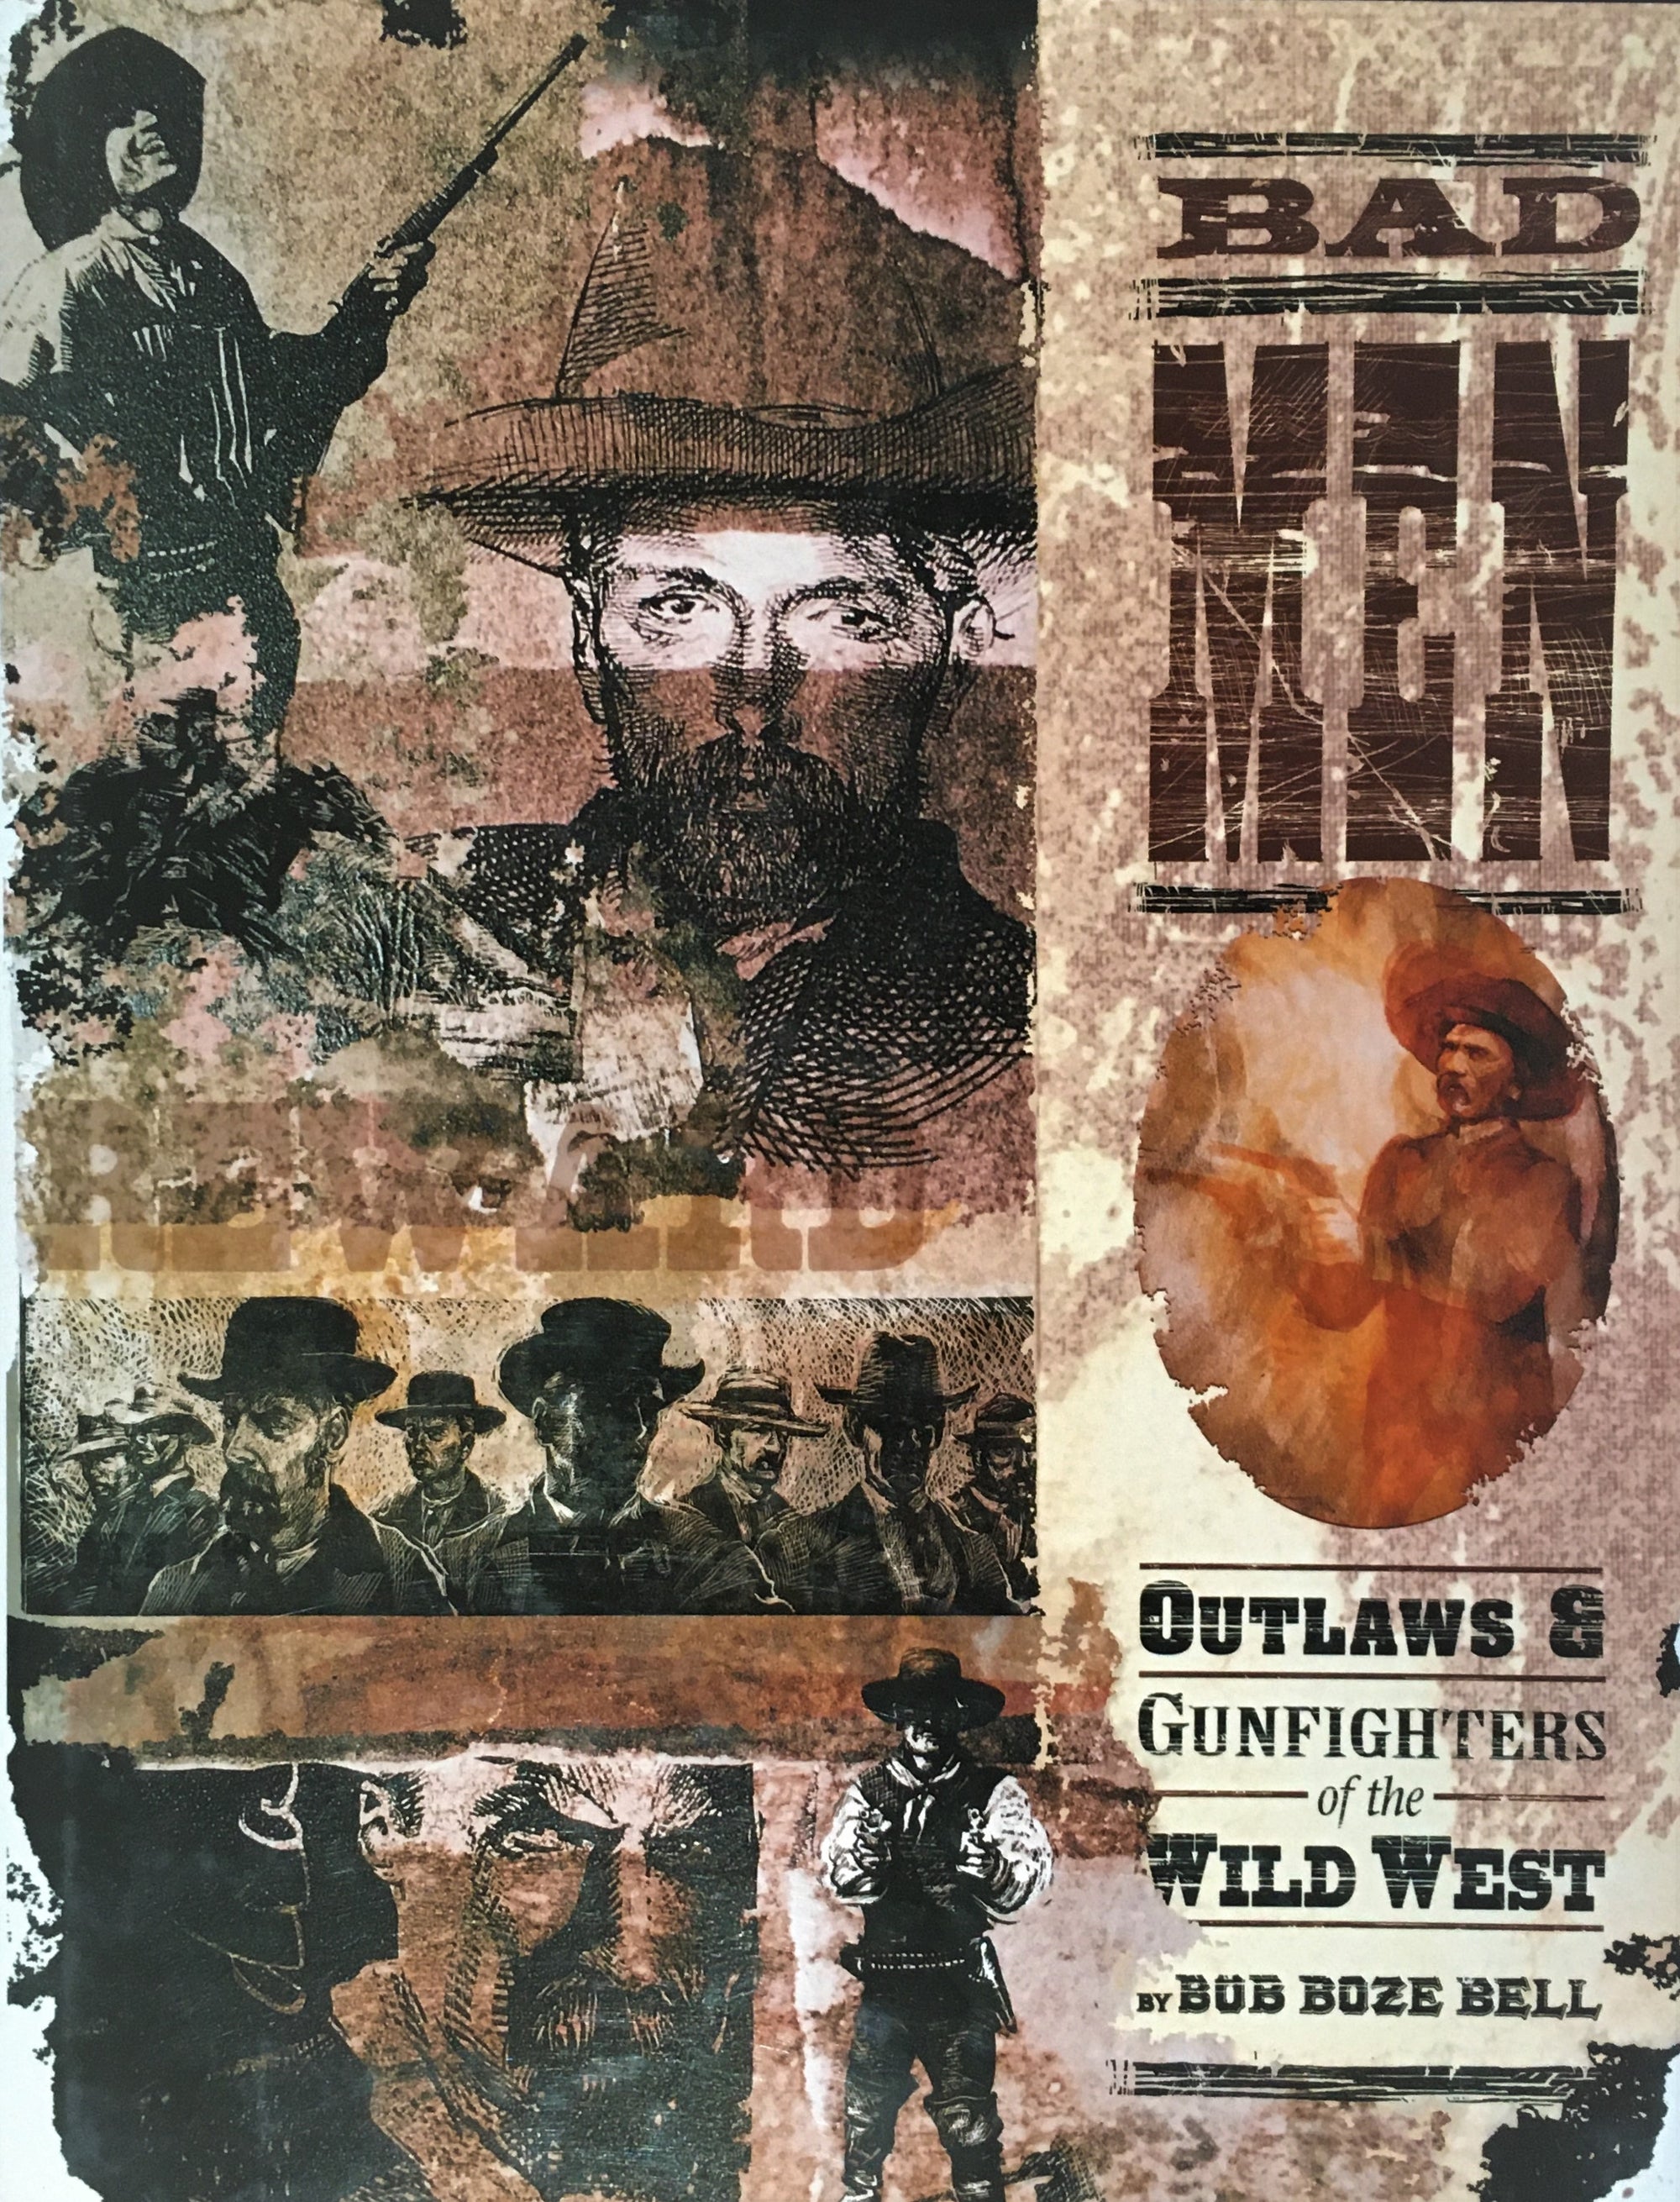 Bad Men: Outlaws & Gunfighters of the Wild West by Bob Boze Bell